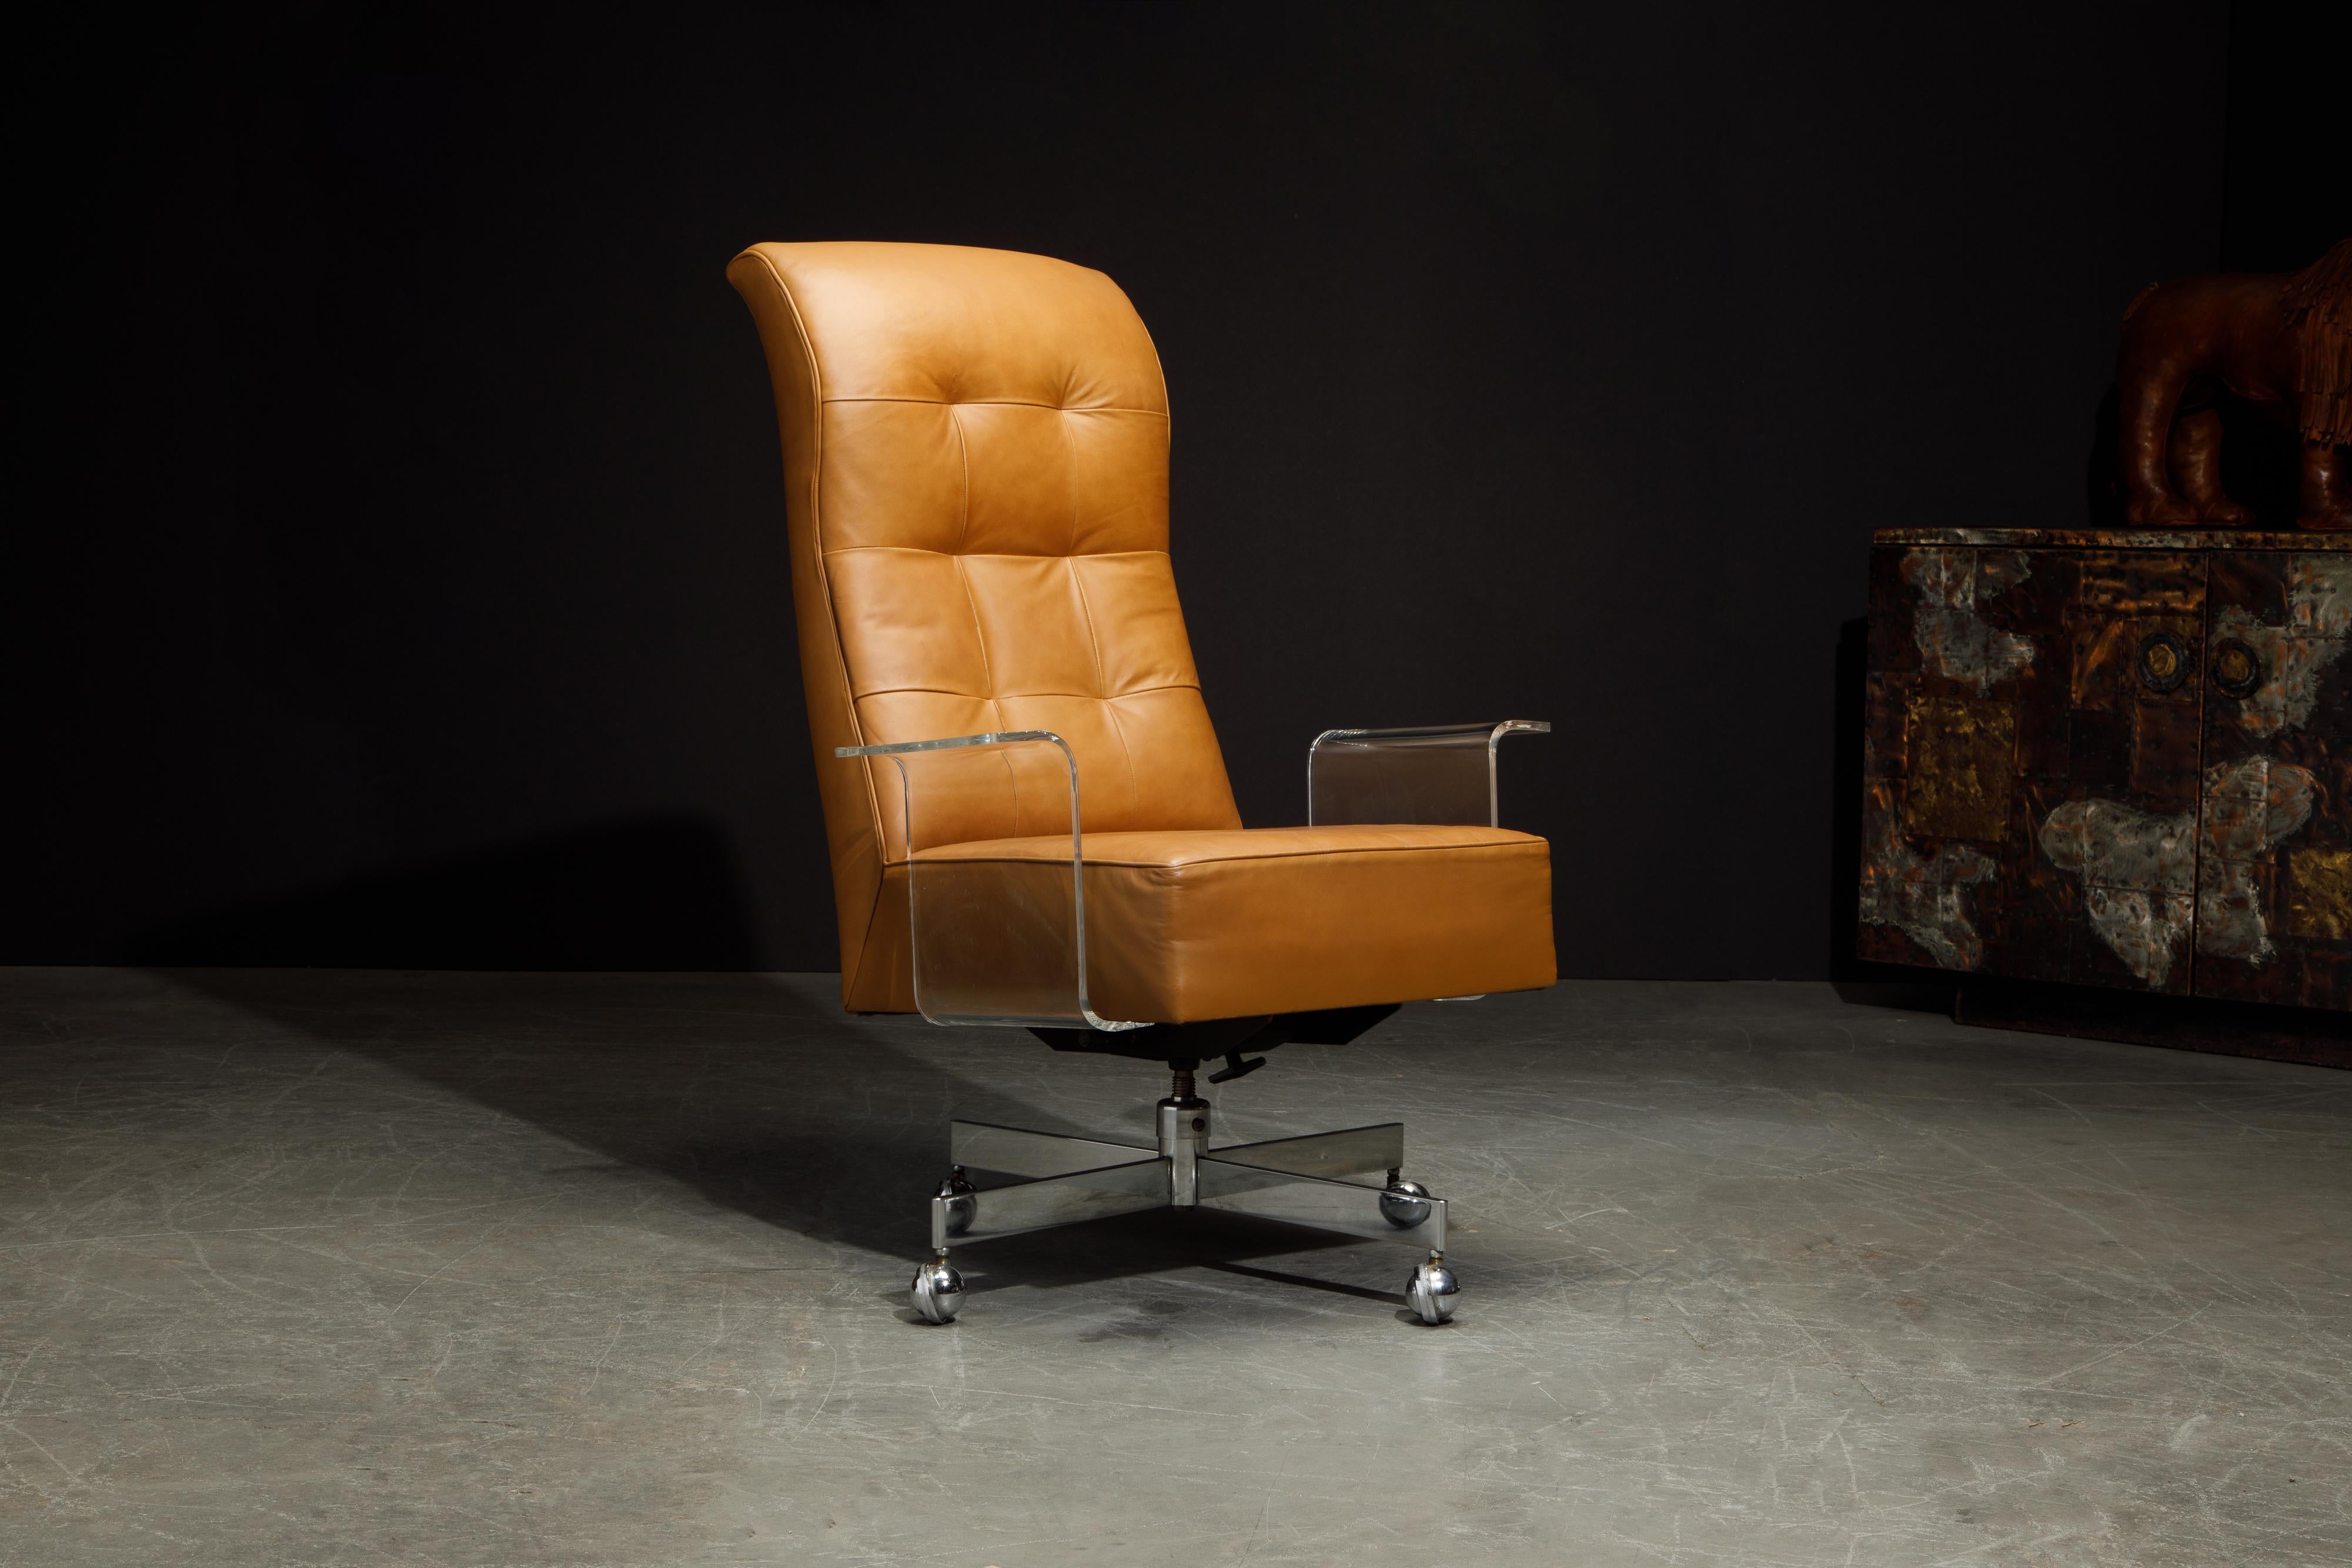 This stunning lucite, warm brown leather and chrome executive desk chair is by Vladimir Kagan for Vladimir Kagan Designs, circa 1970. This Kagan desk chair features swivel, recline, and height and tilt adjustment mechanisms. On a heavy polished